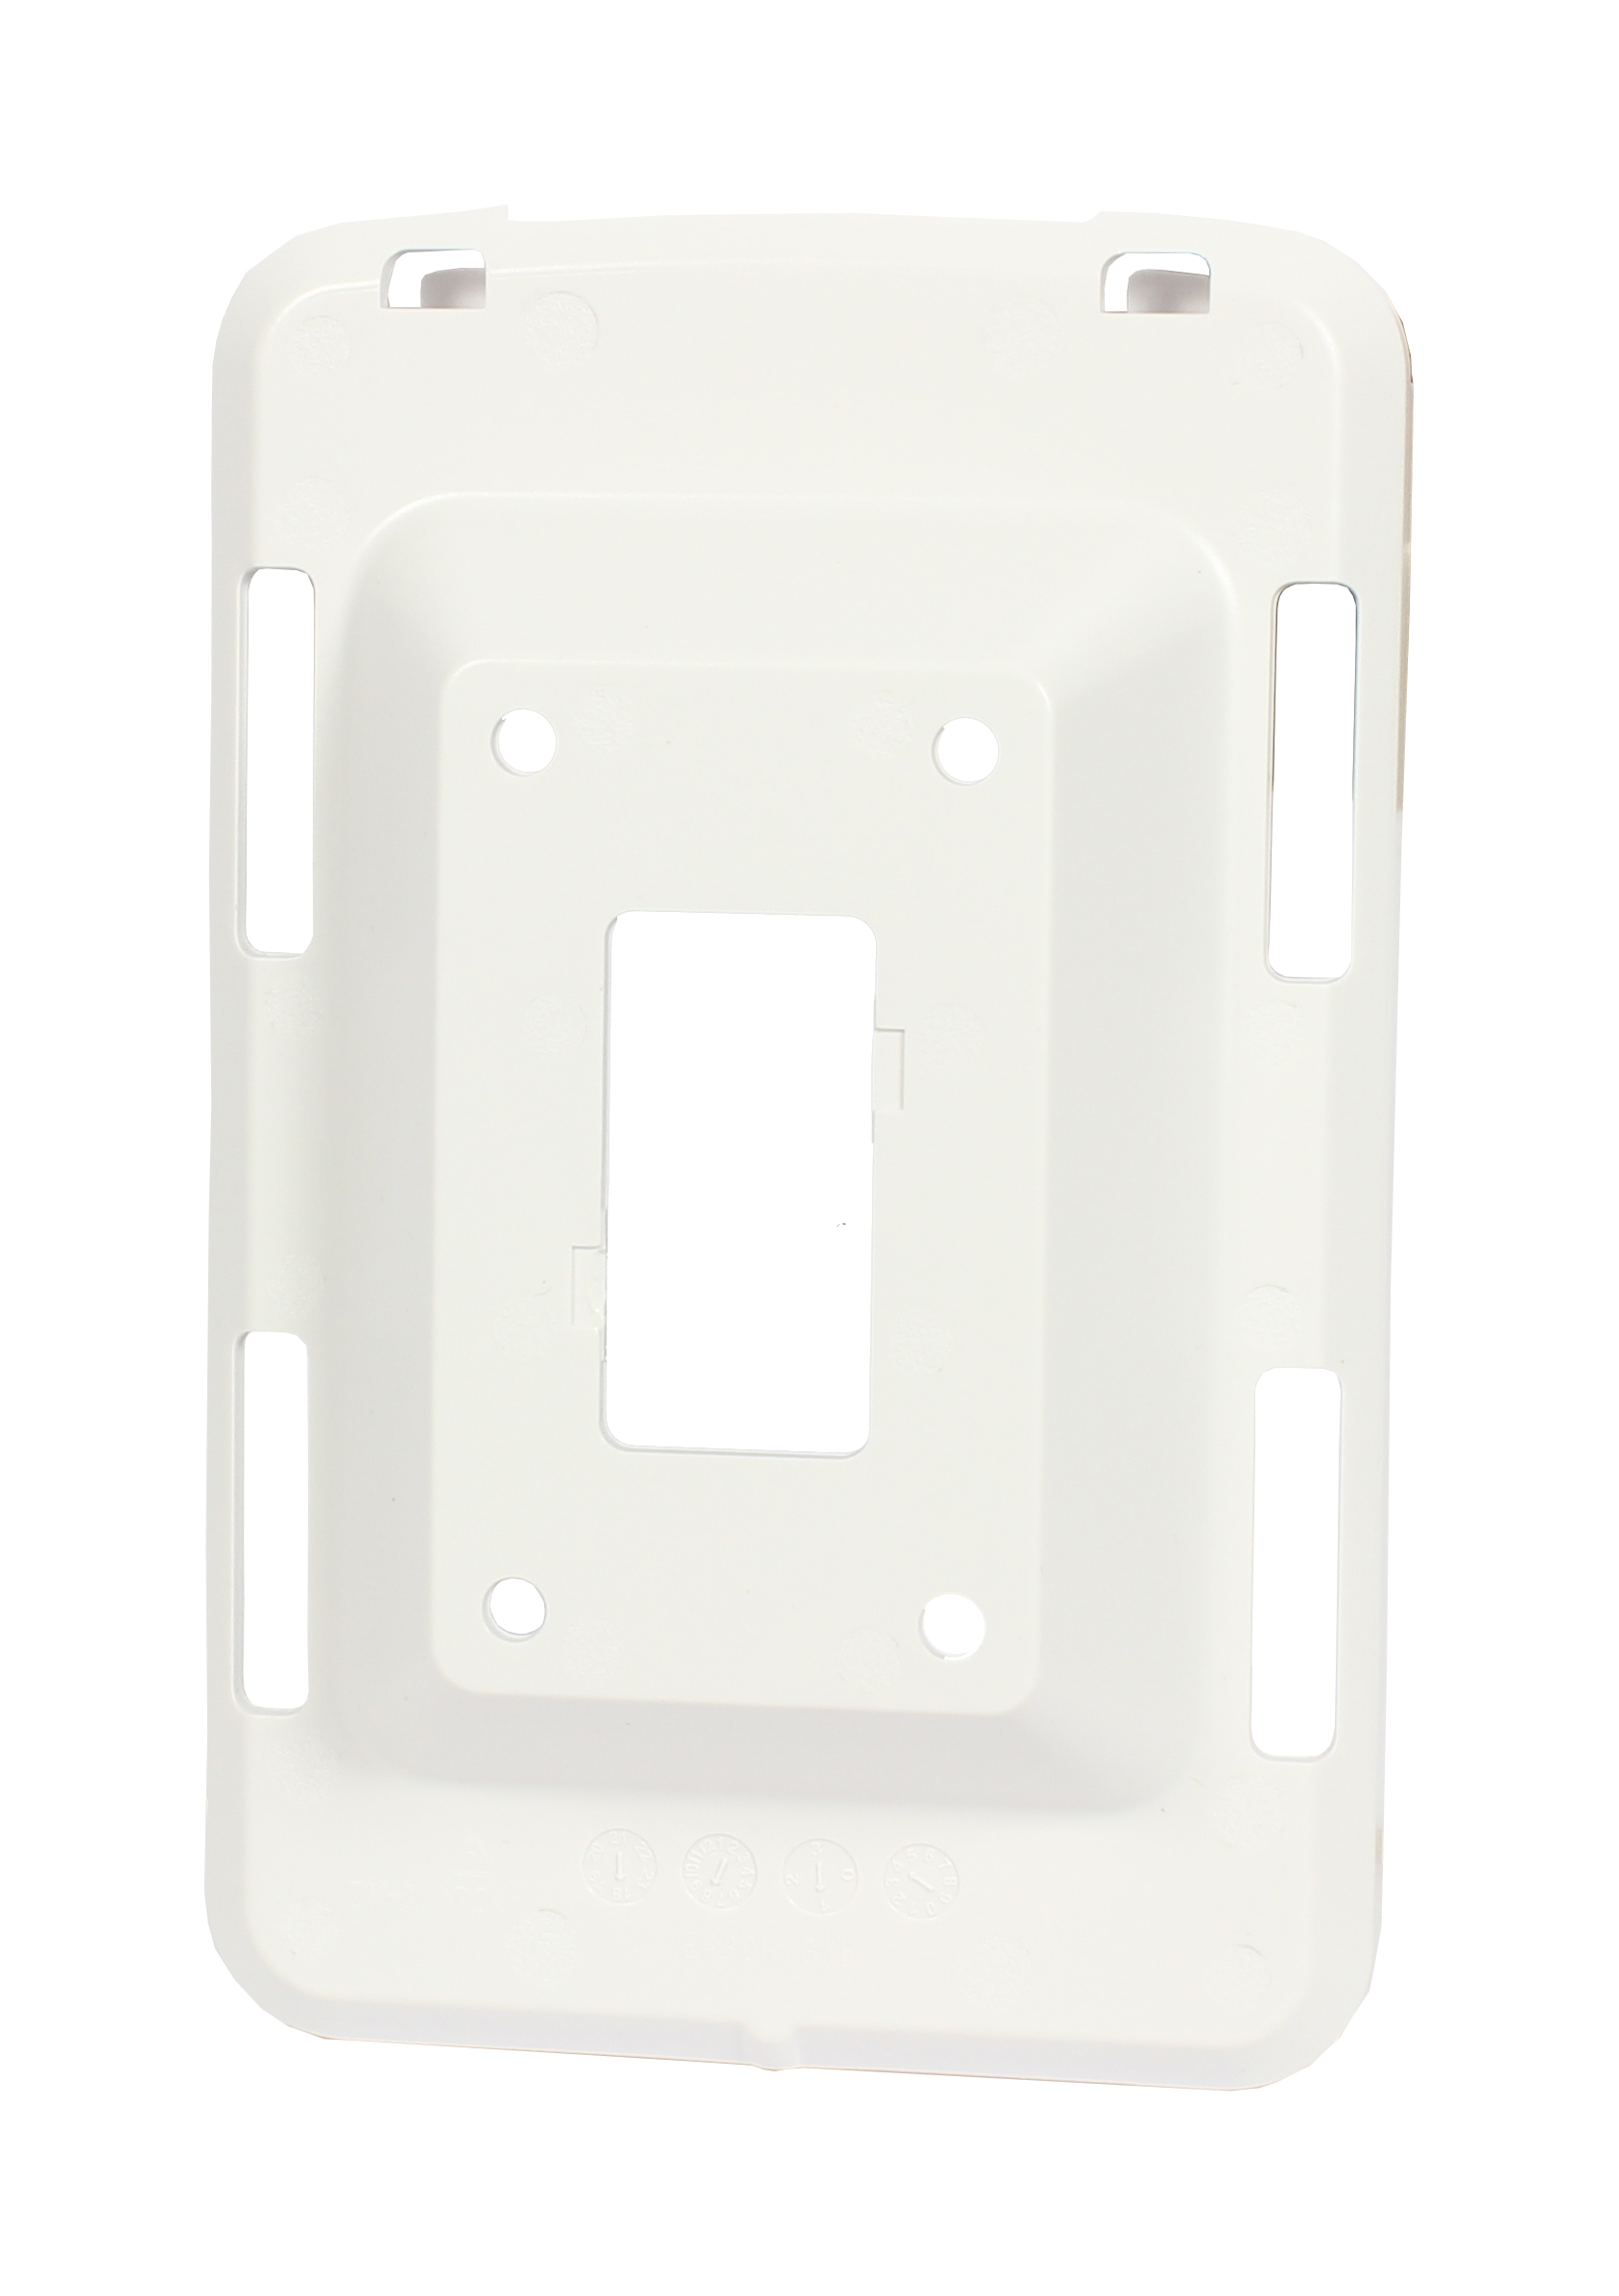 Cambium Networks cnPilot e430H Wall bracket for generic wall mounting of AP